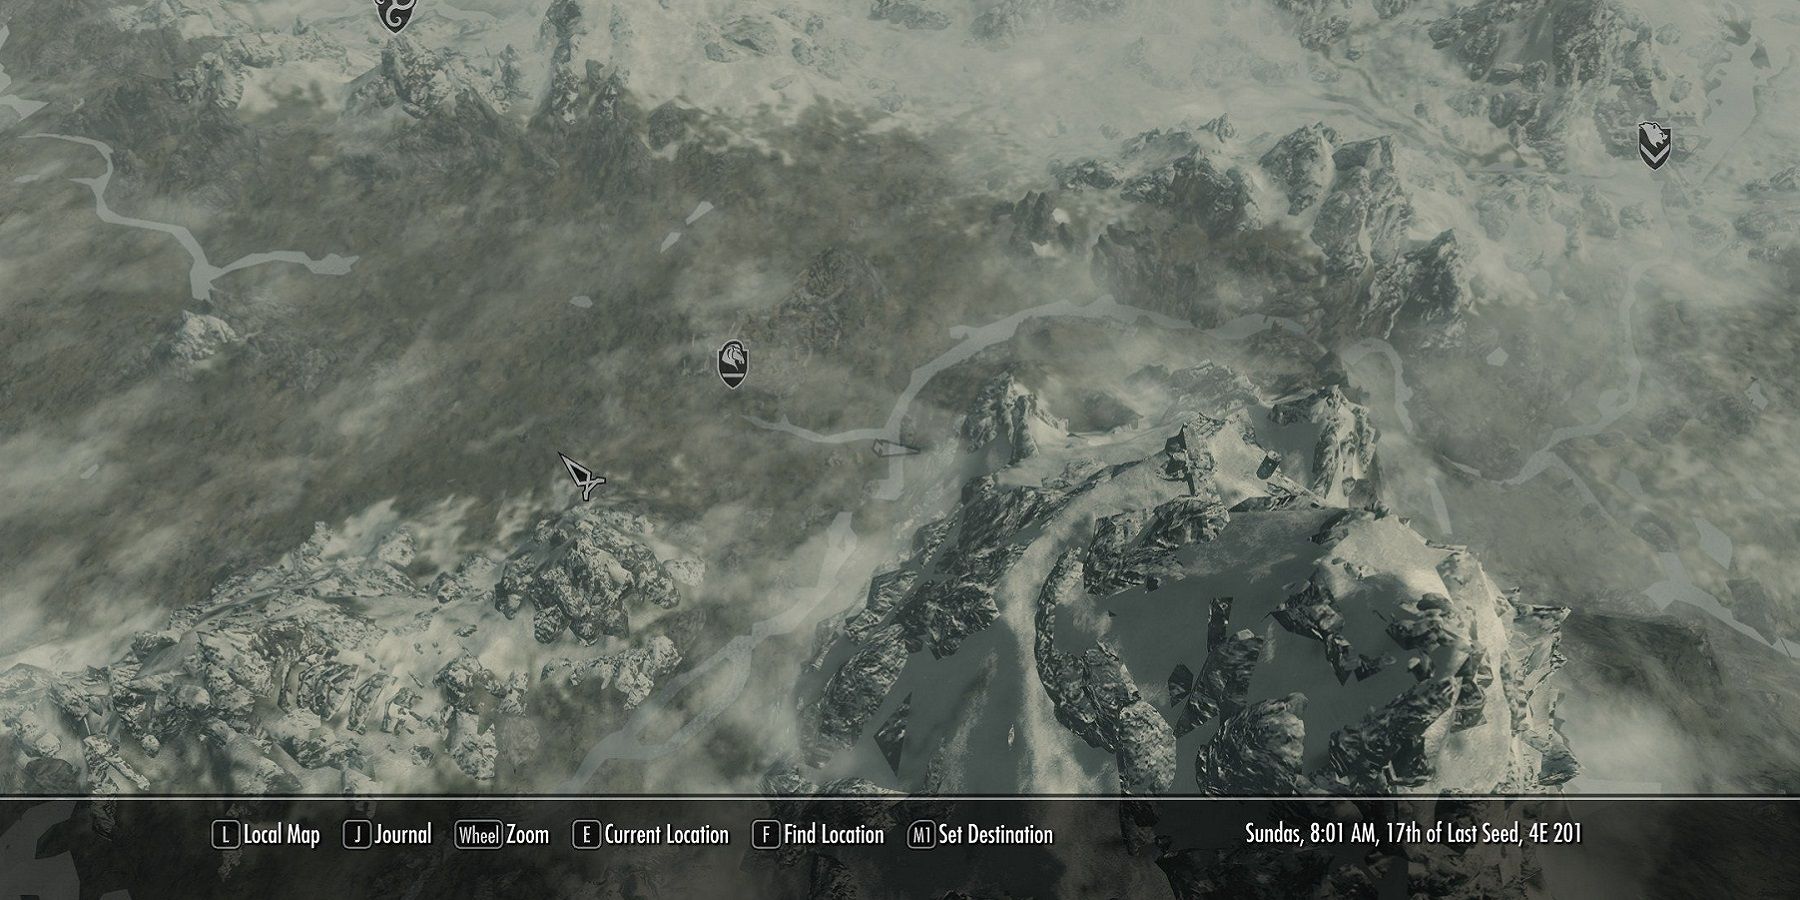 Image from Skyrim showing the world map.